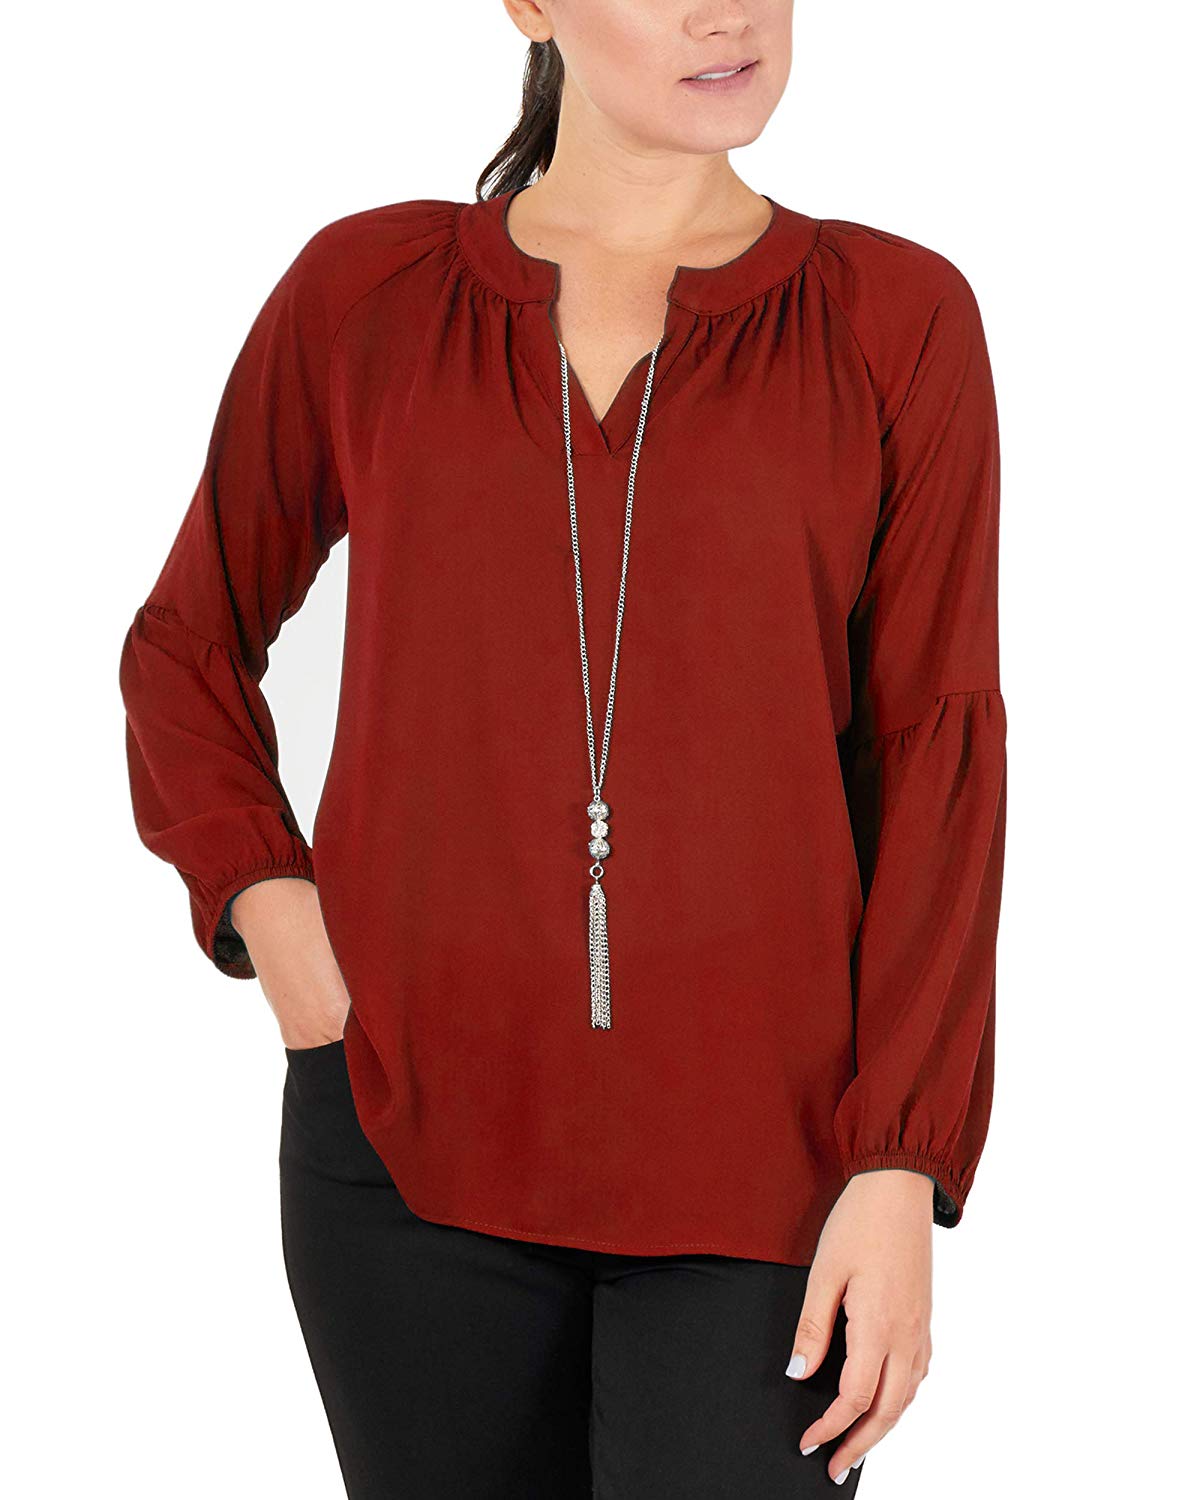 Women's Petite Balloon Sleeve Necklace Top Red PM